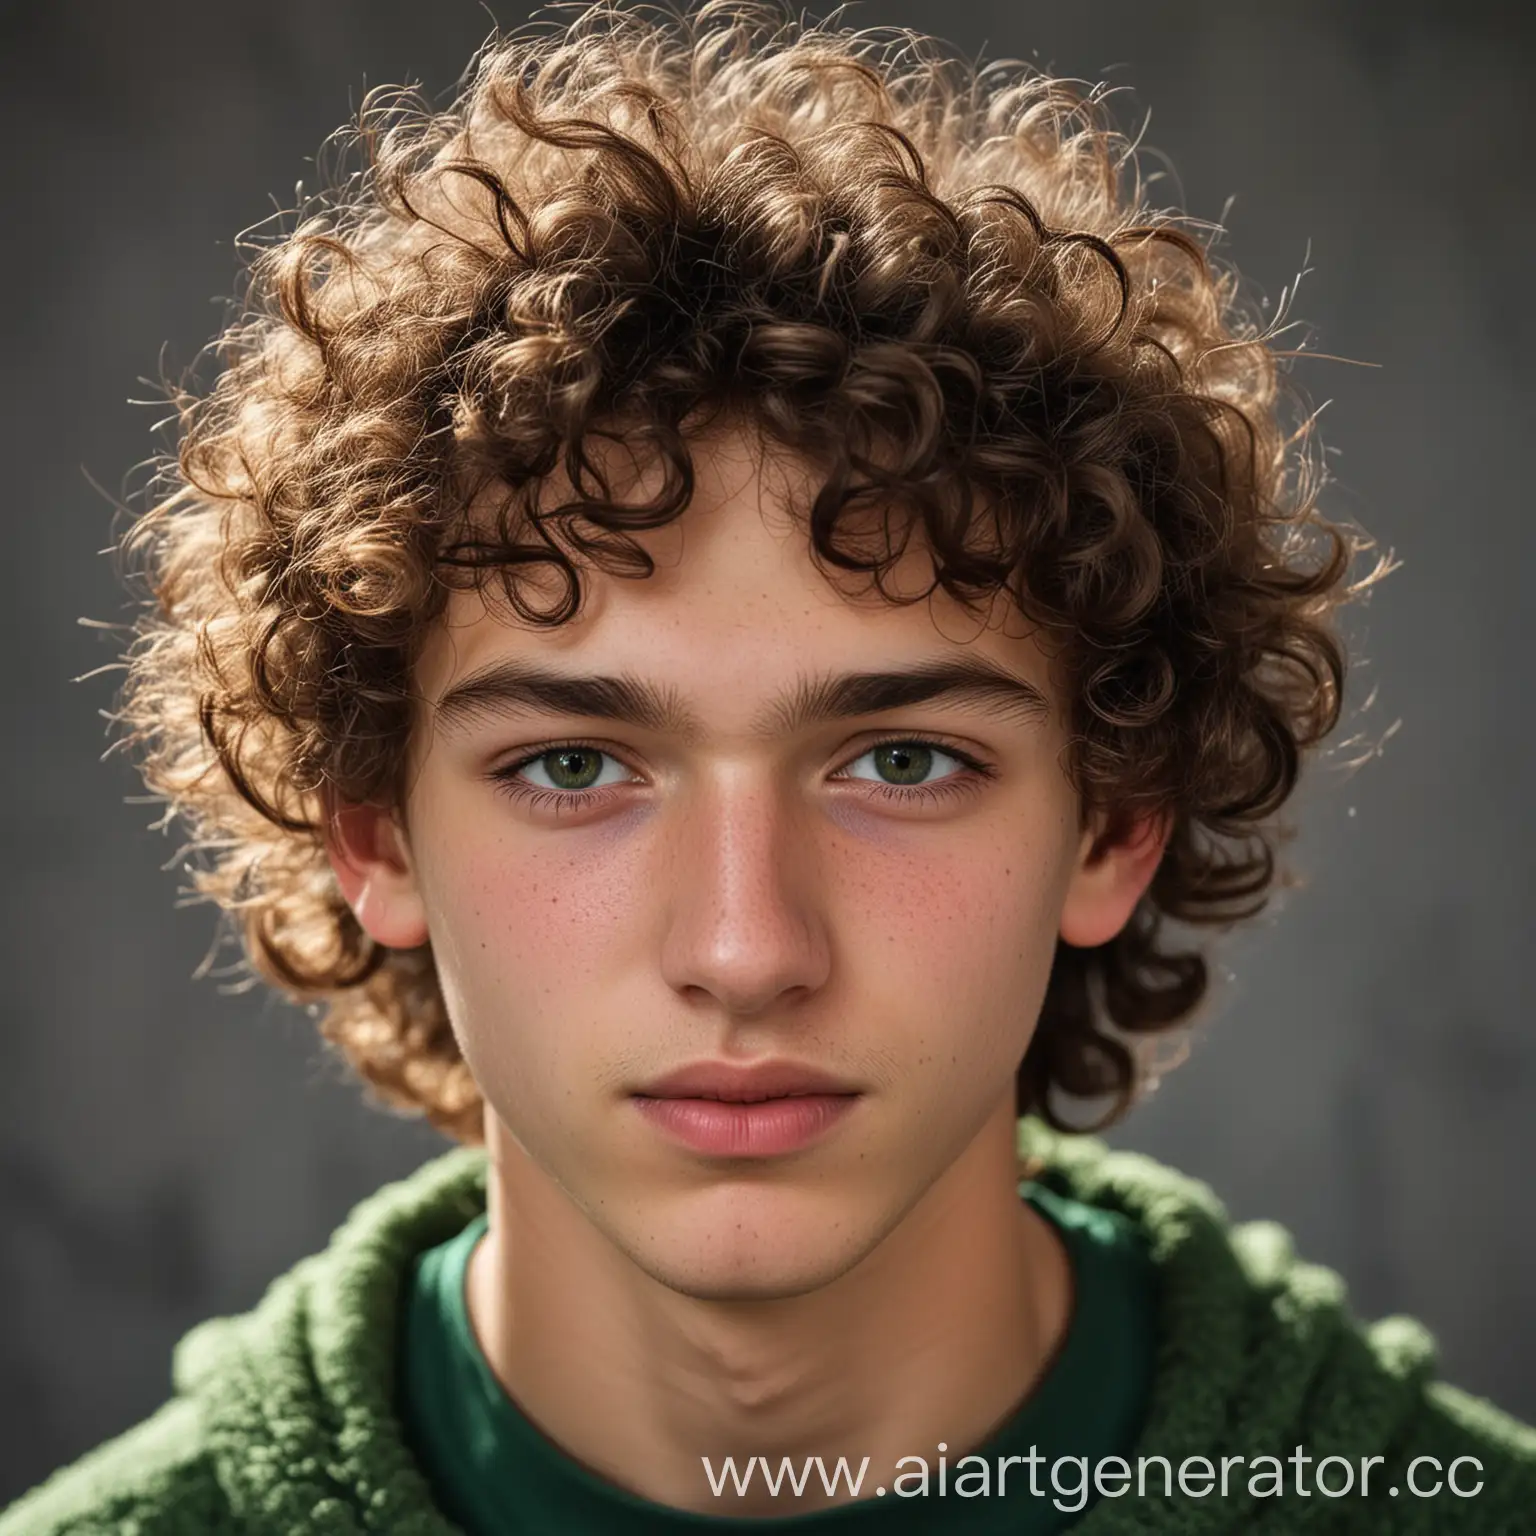 Portrait-of-18YearOld-Russian-Boy-with-Curly-Hair-and-Dark-Green-Eyes